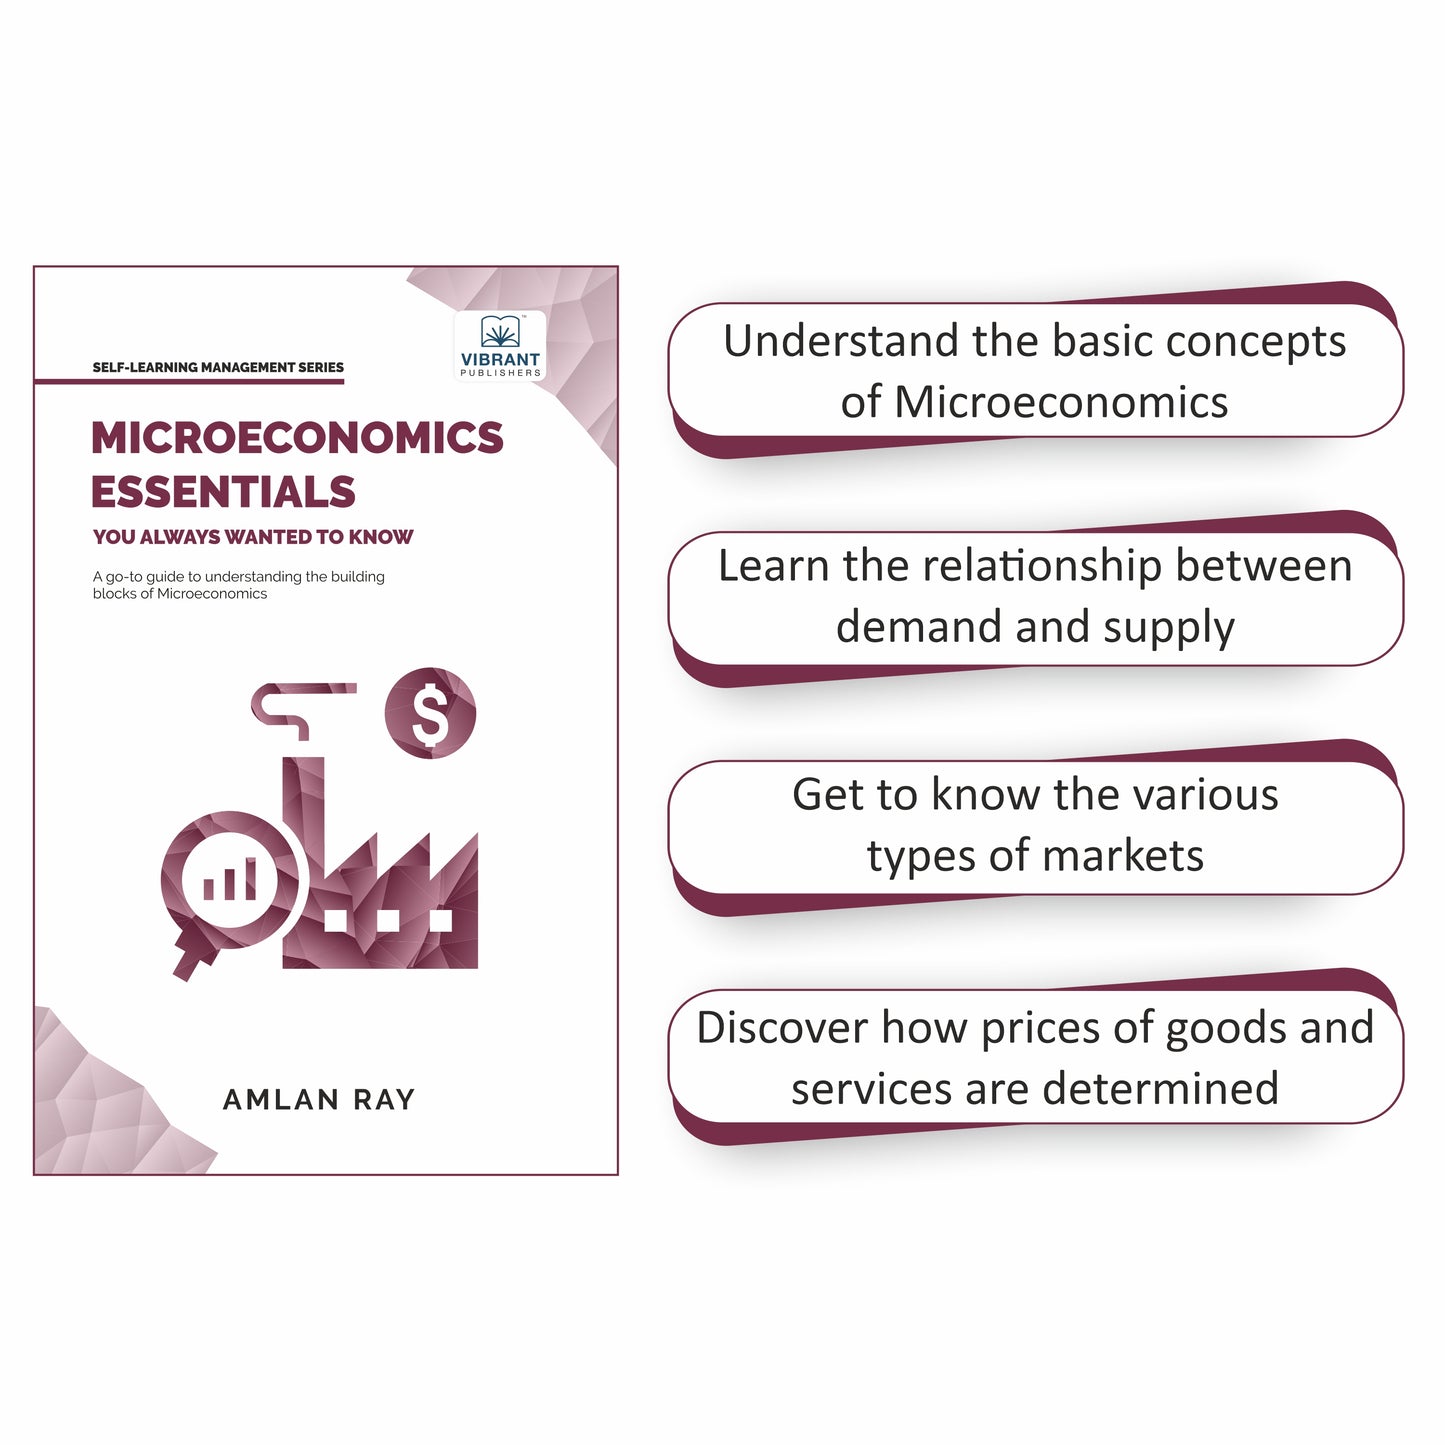 Microeconomics and Finance Essentials - Includes books on Microeconomics, Financial Accounting, Financial Management, Cost Accounting & Management